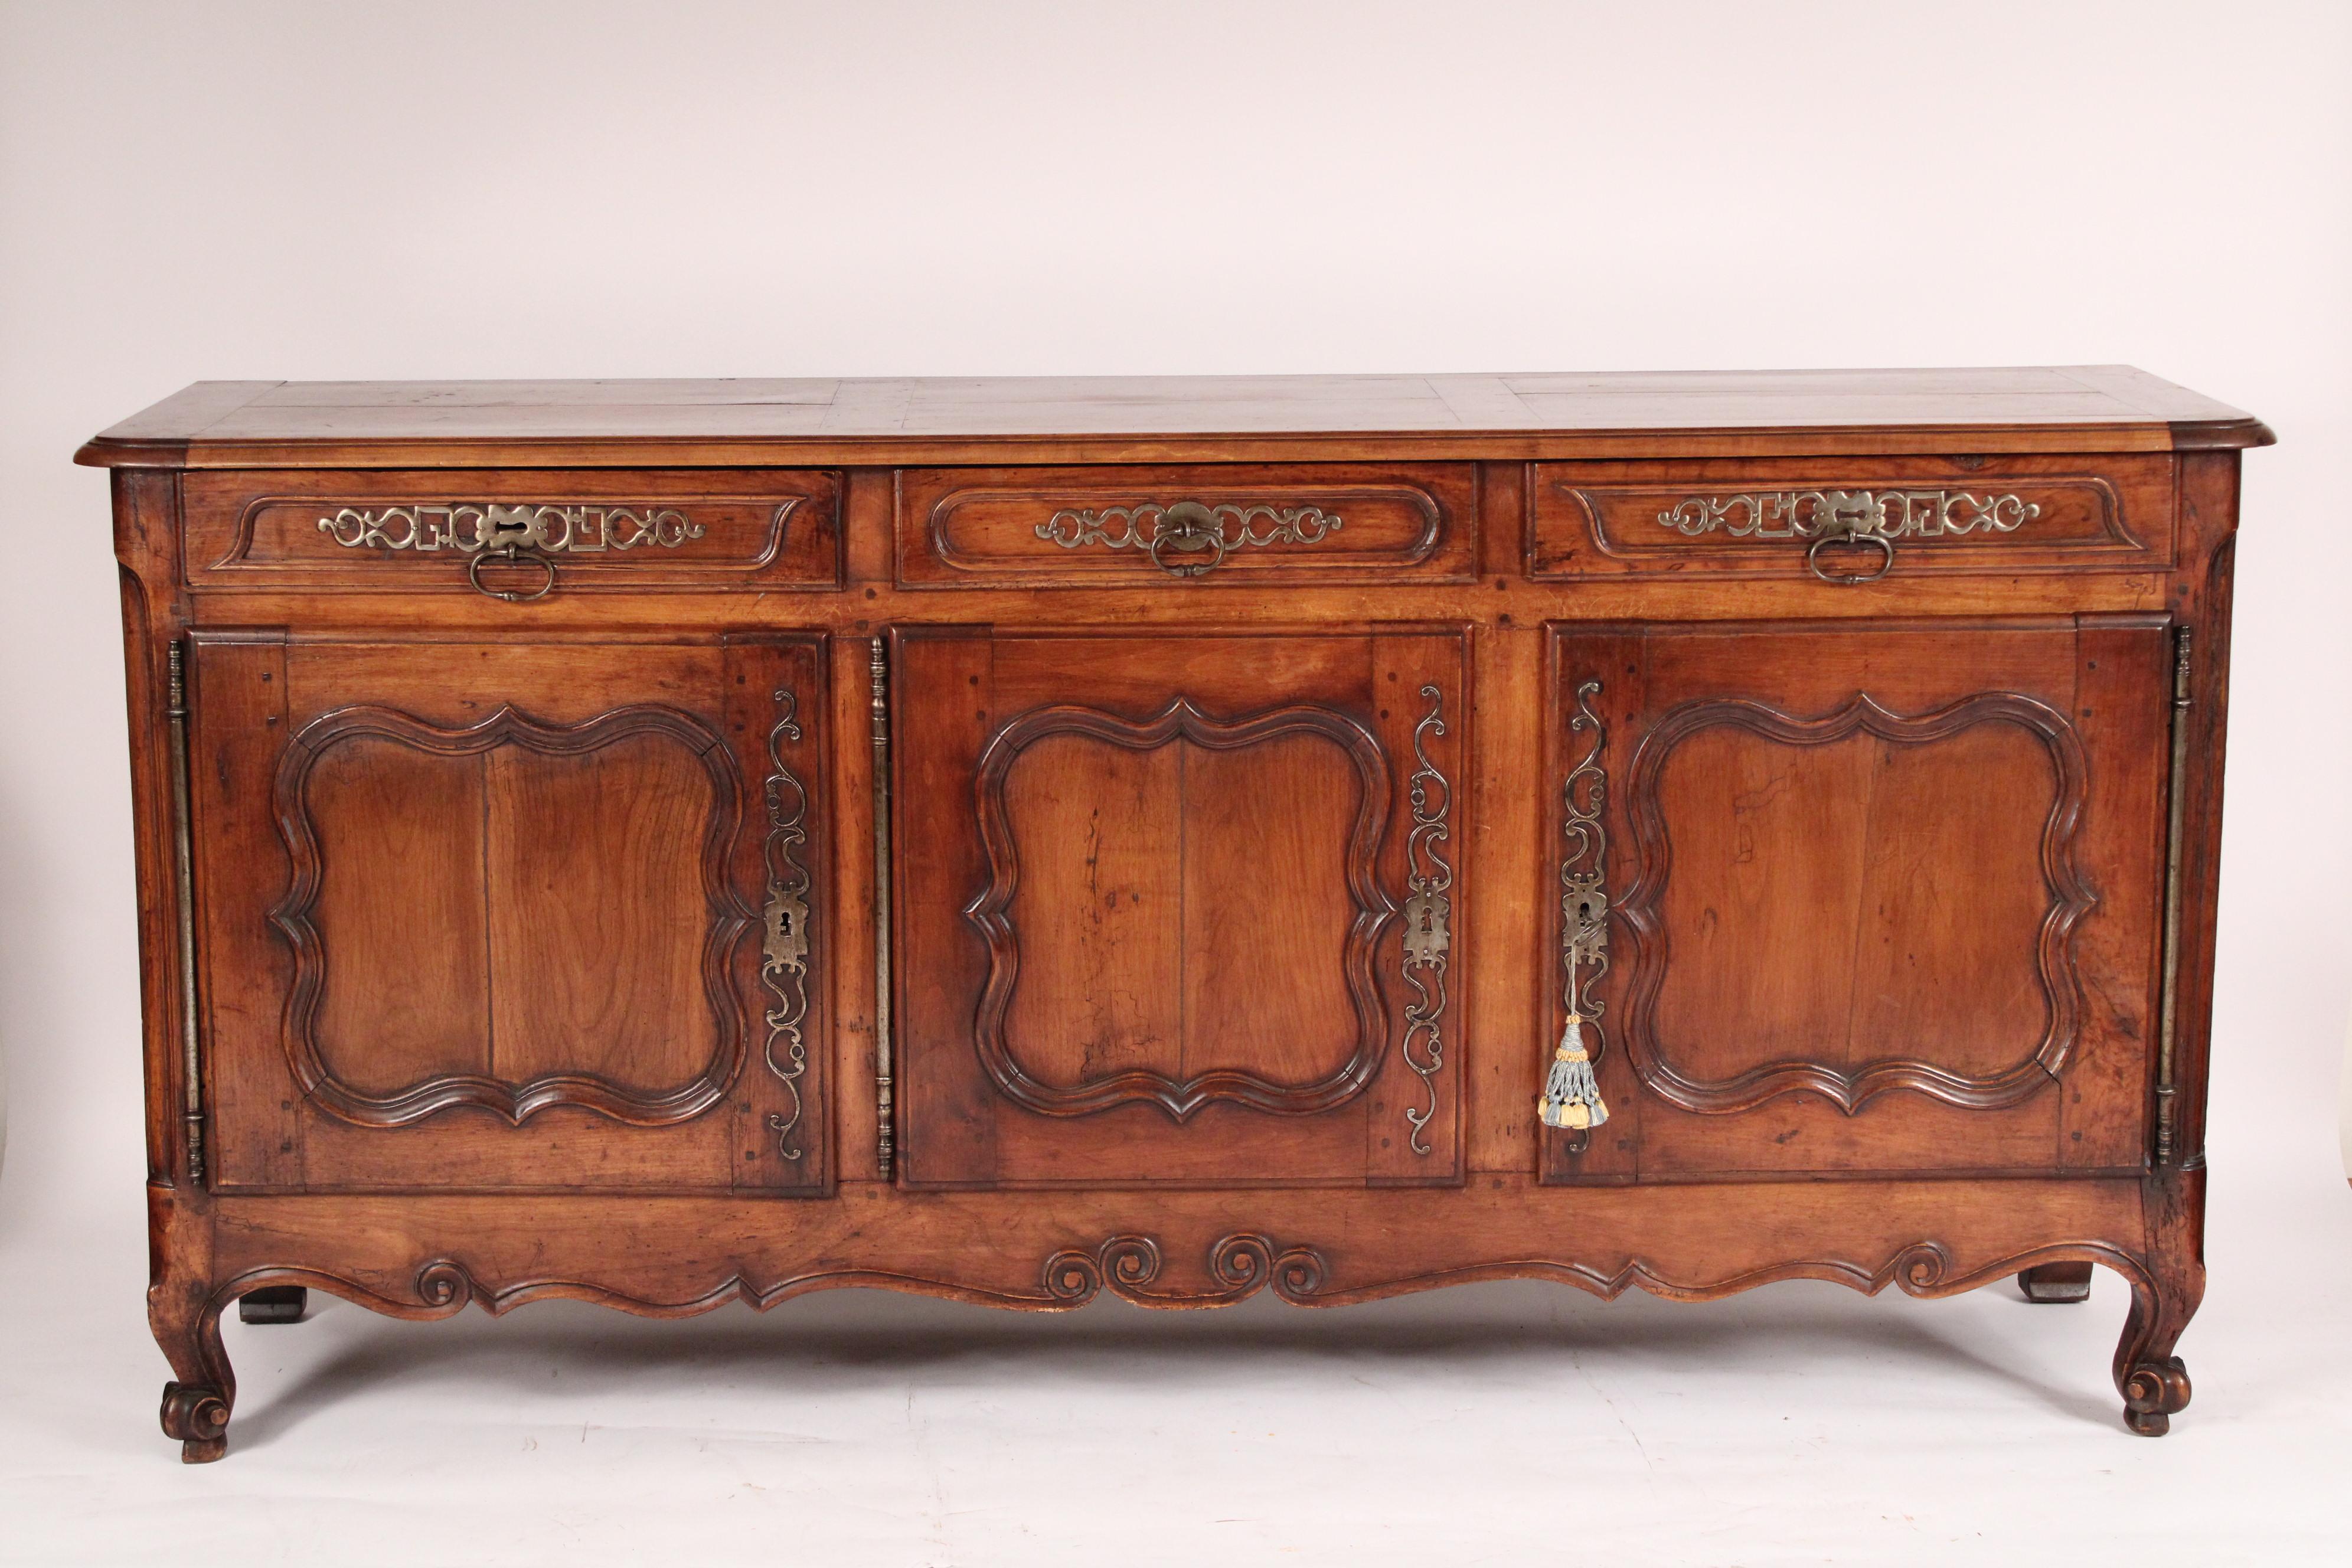 Antique Louis XV style provincial fruit wood enfilade, circa early 19th century. With a paneled rectangular top with rounded corners, 3 drawers with steel hardware, 3 doors each with cartouche moldings and inset fruit wood panels and steel